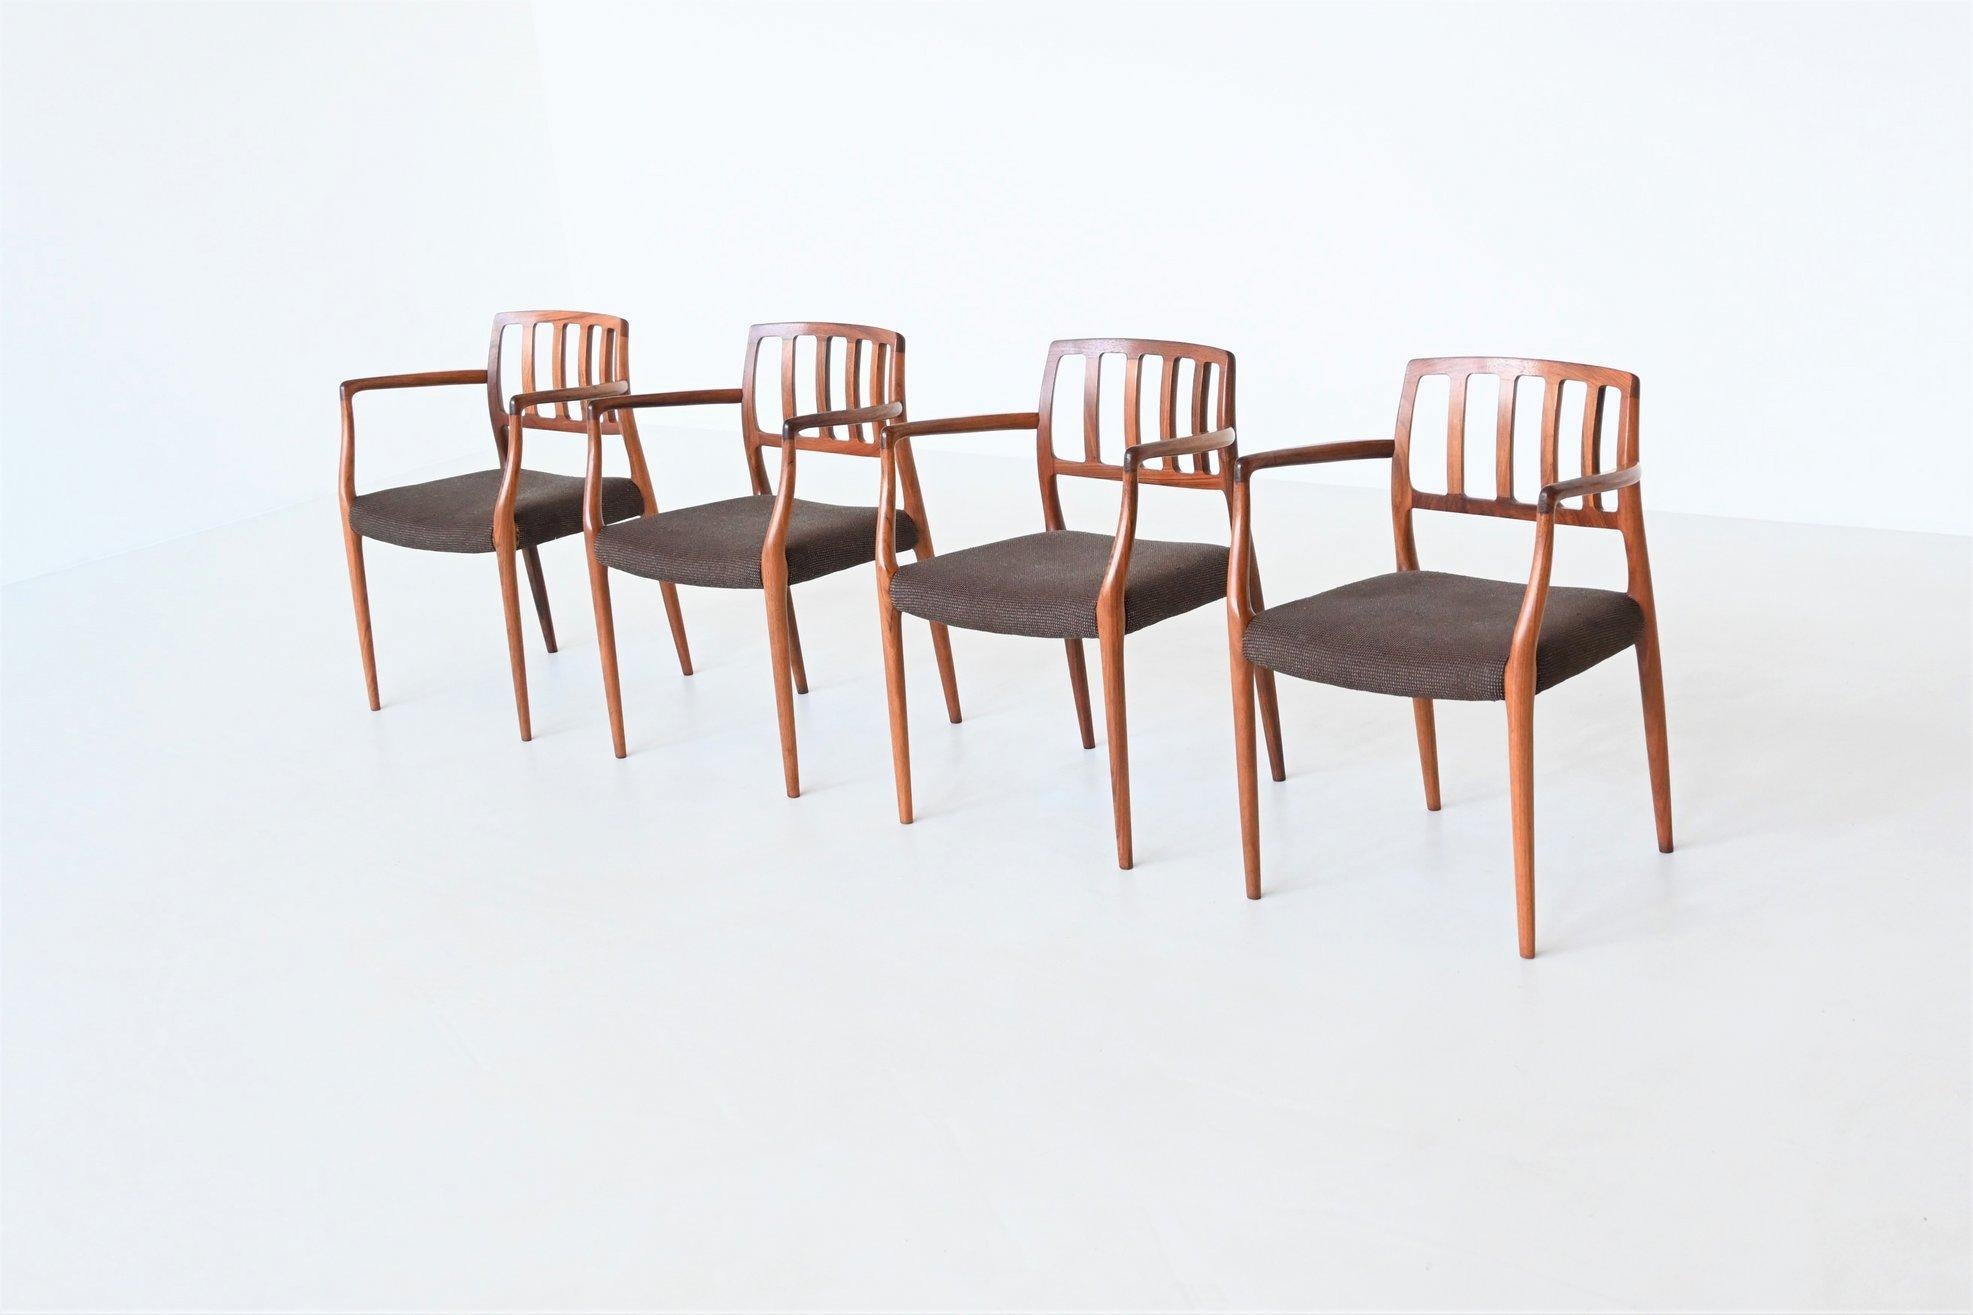 Beautiful shaped and rare set of four armchairs model 66 designed by Niels Otto Møller and manufactured by J.L. Møller Mobelfabrik, Denmark 1974. These sculptural dining chairs are made of solid amazingly grained rosewood and the seats are